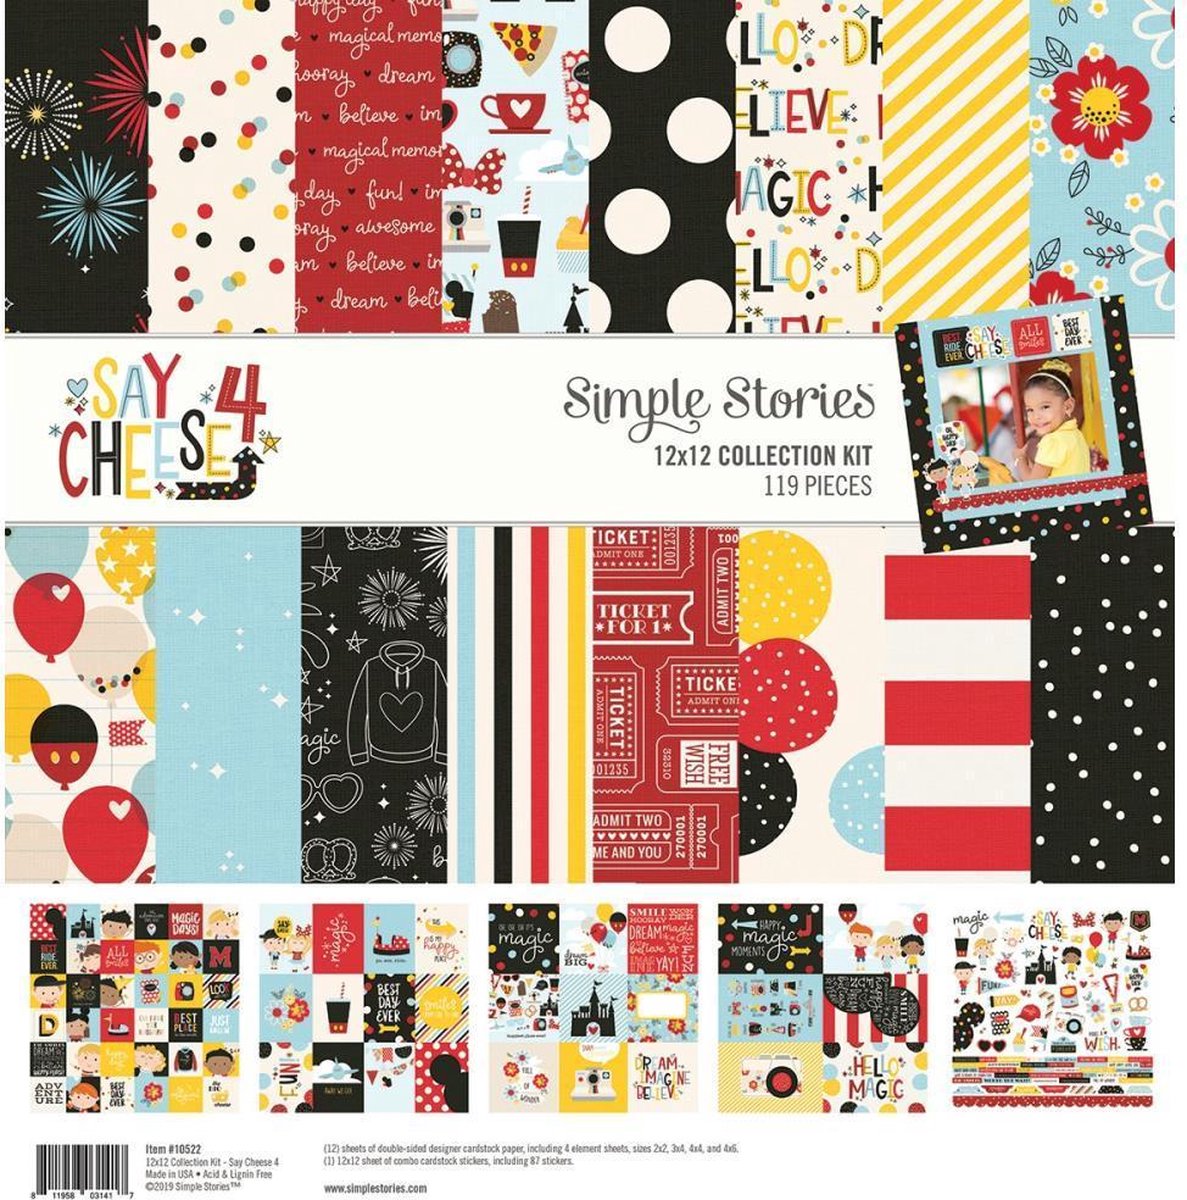 Simple Stories: Say Cheese 4 Collection Kit 12